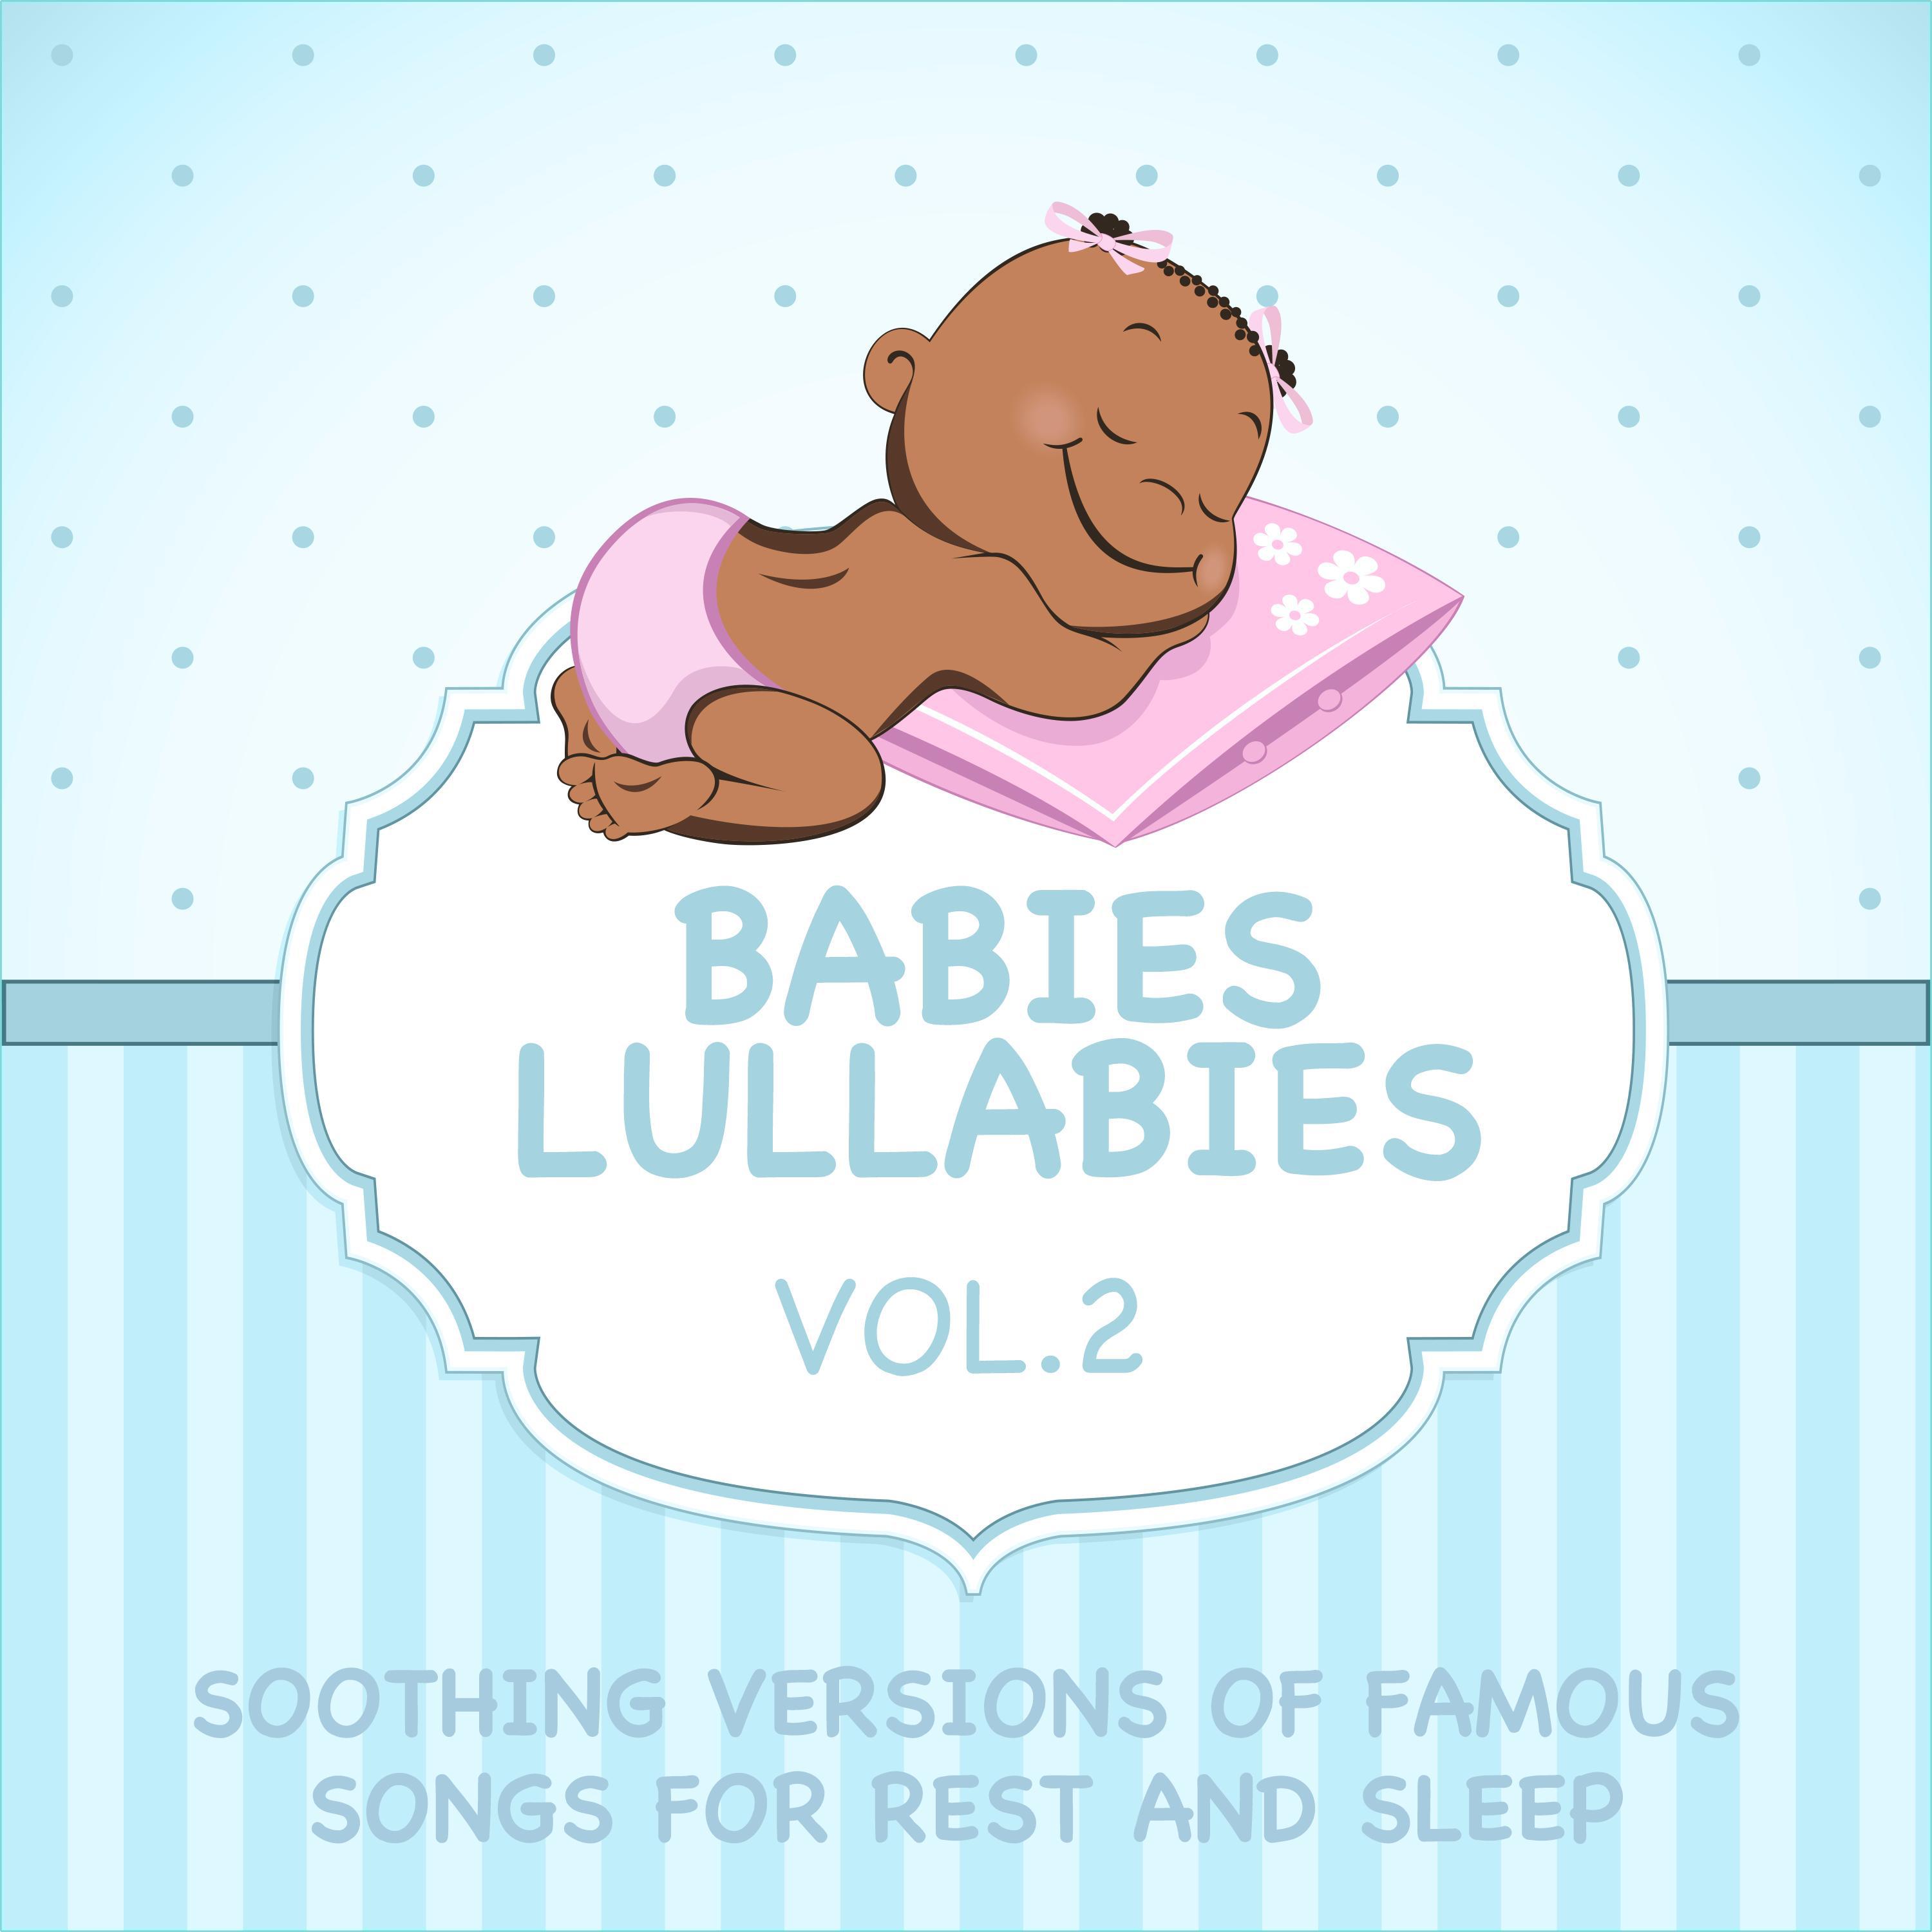 Babies Lullabies - Soothing Versions of Famous Songs for Rest and Sleep, Vol. 2